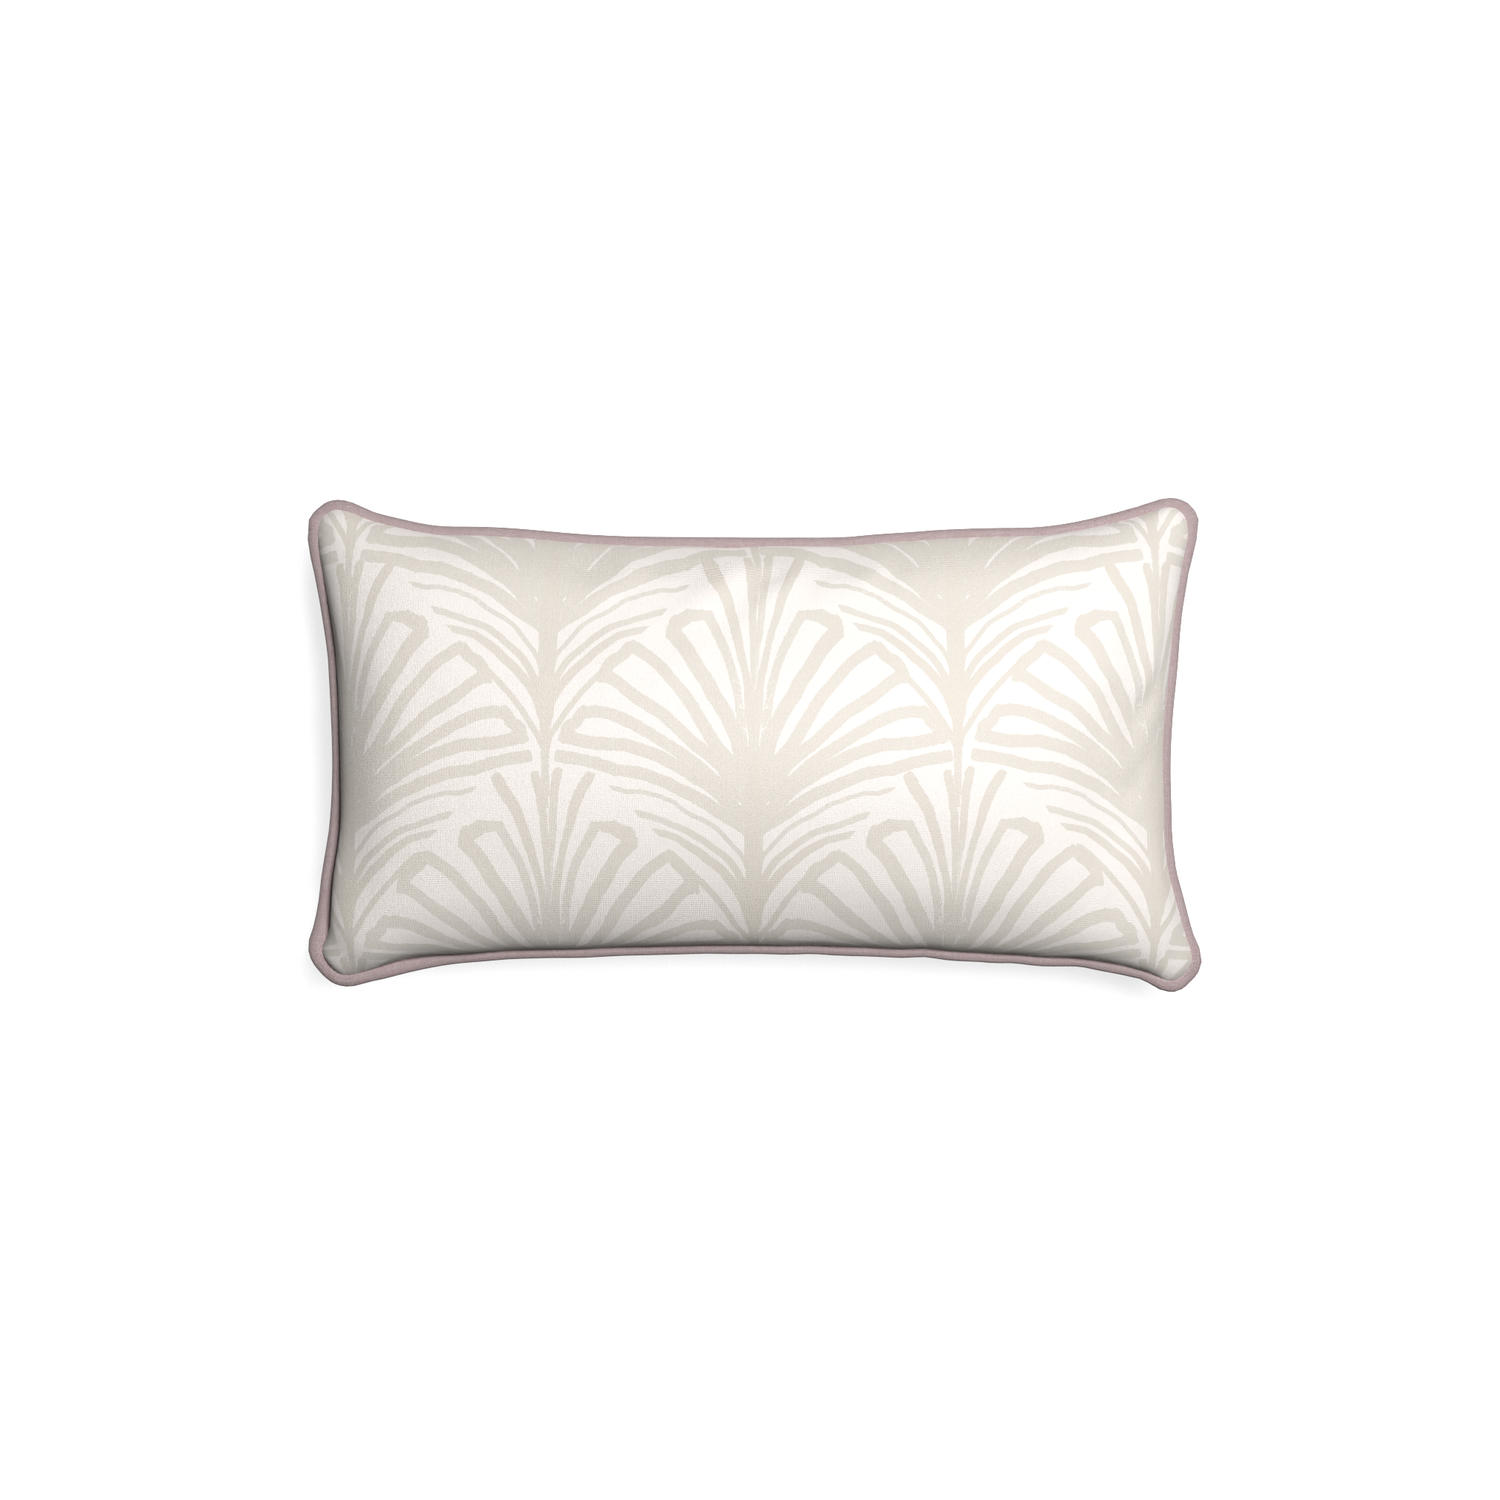 Petite-lumbar suzy sand custom beige palmpillow with orchid piping on white background